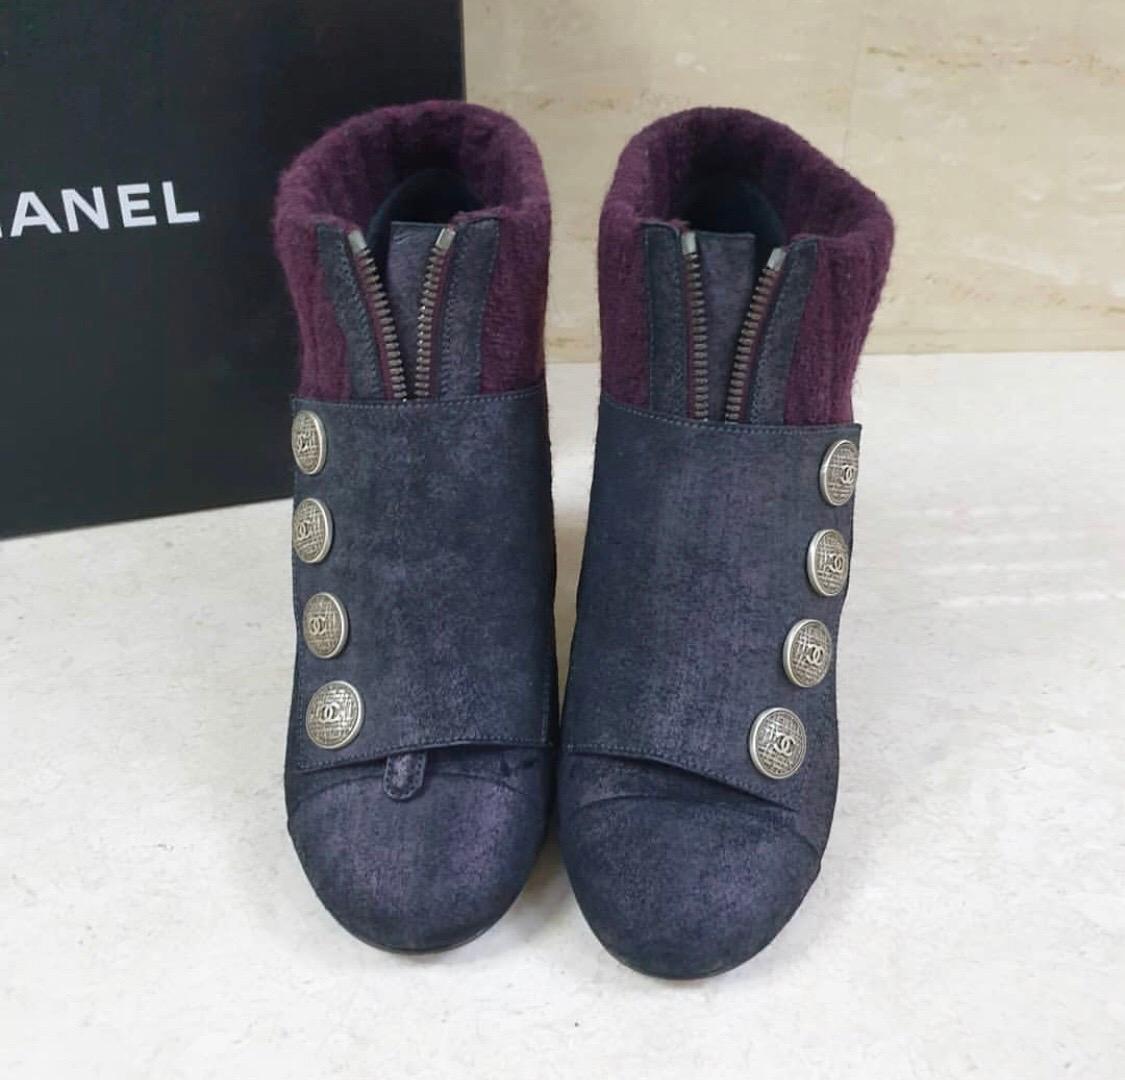 Chanel Paris-Edinburgh CC Booties
Bordeaux distressed leather Chanel round-toe ankle boots with tonal stitching, knit trim, stacked heels and zip closures at uppers featuring silver-tone interlocking CC snap closures.
This short Chanel biker boots